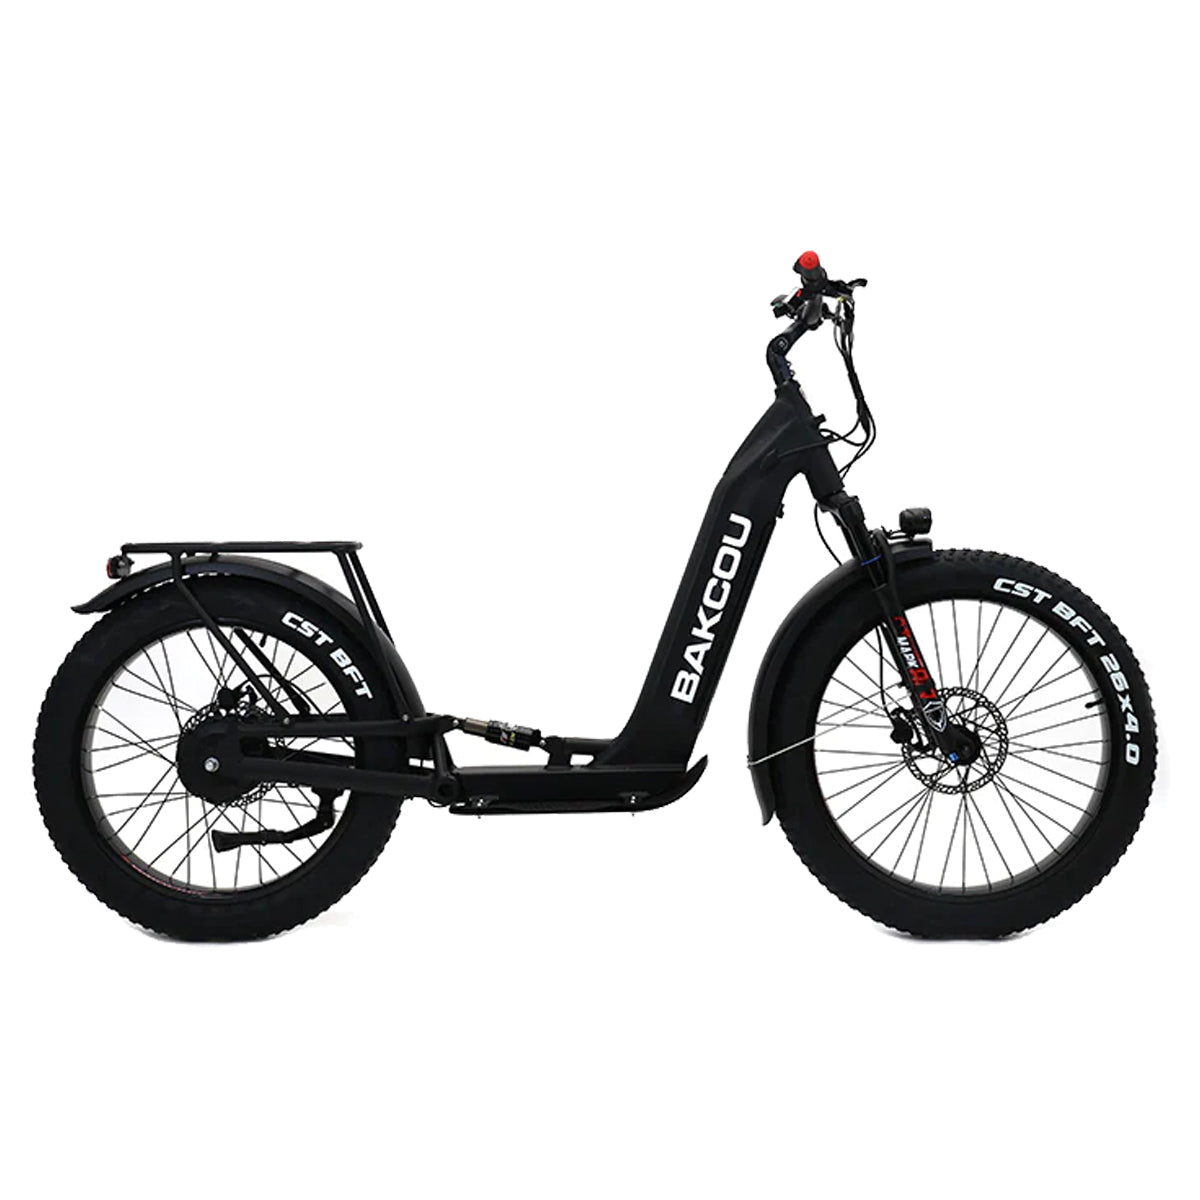 Bakcou Grizzly Electric Scooter in Matte Black by GOHUNT | Bakcou - GOHUNT Shop